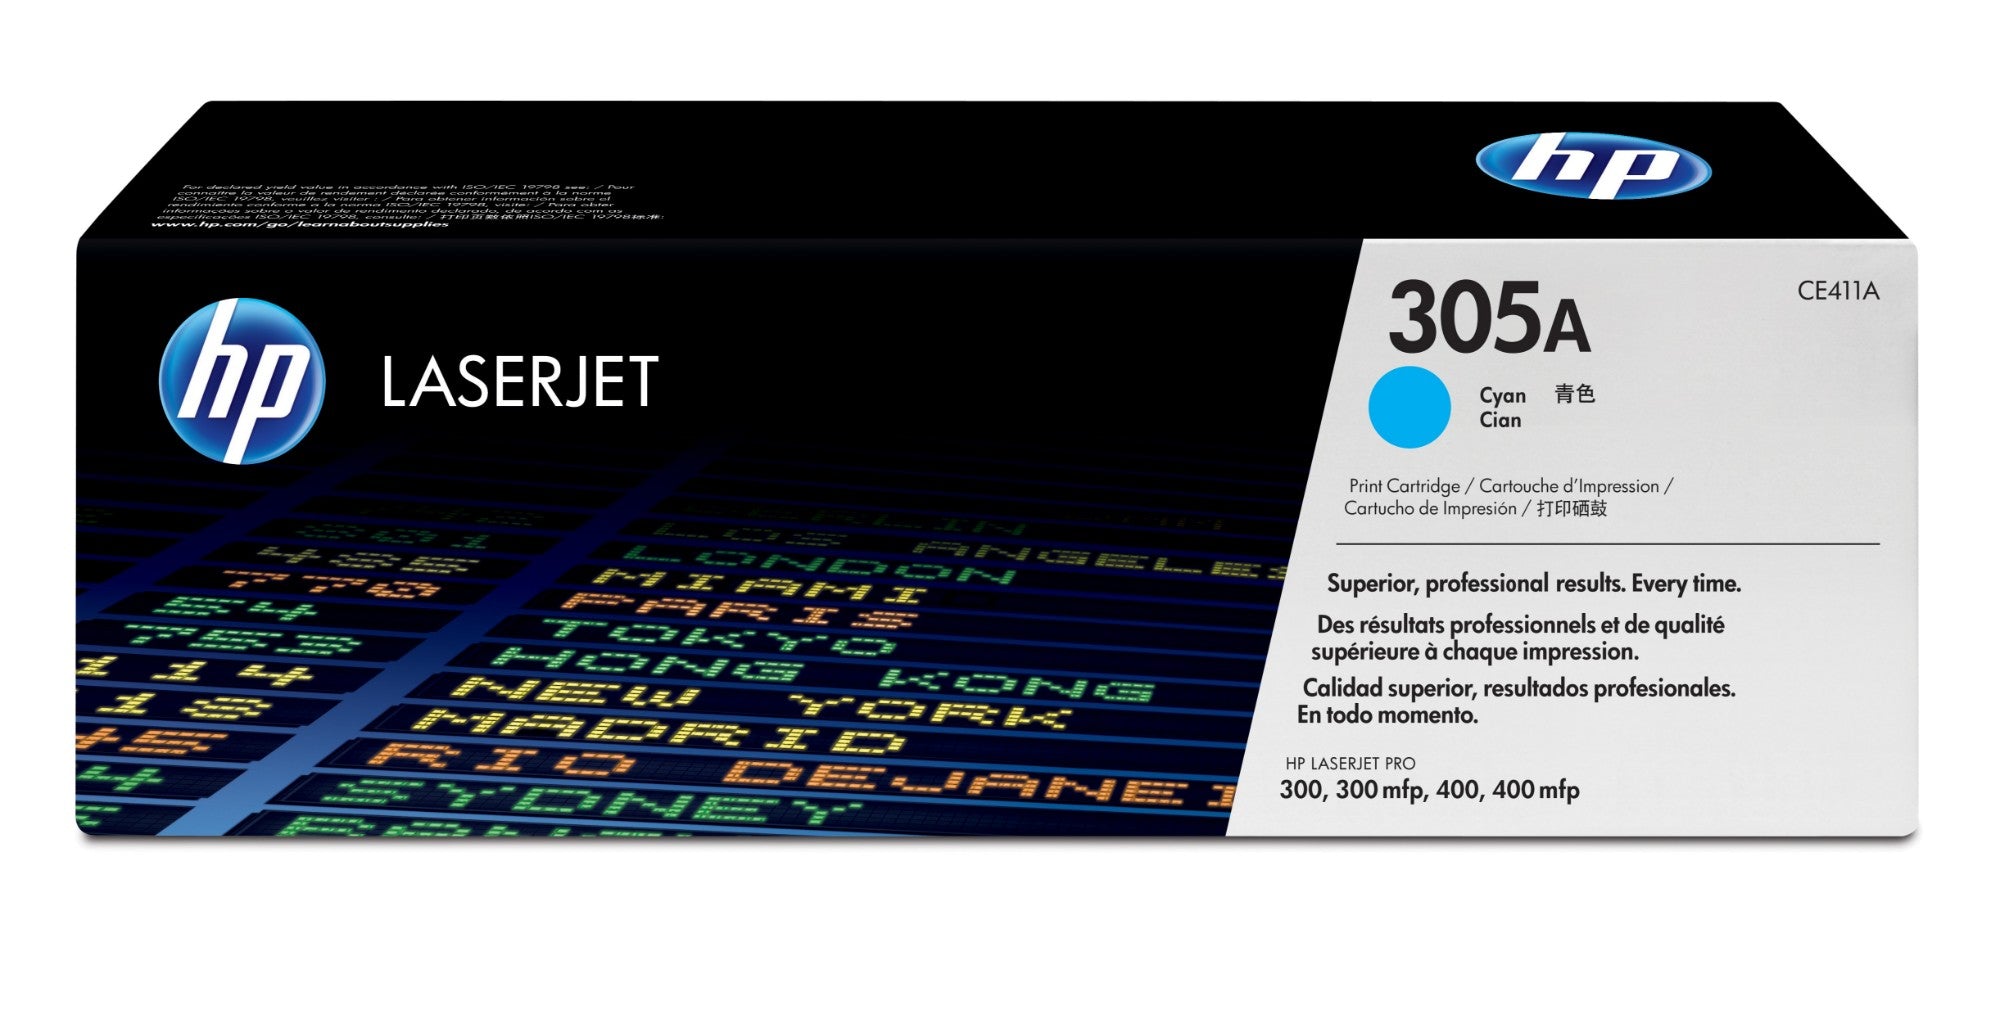 HP CE411A/305A Toner cartridge cyan, 2.6K pages ISO/IEC 19798 for HP LaserJet M 375